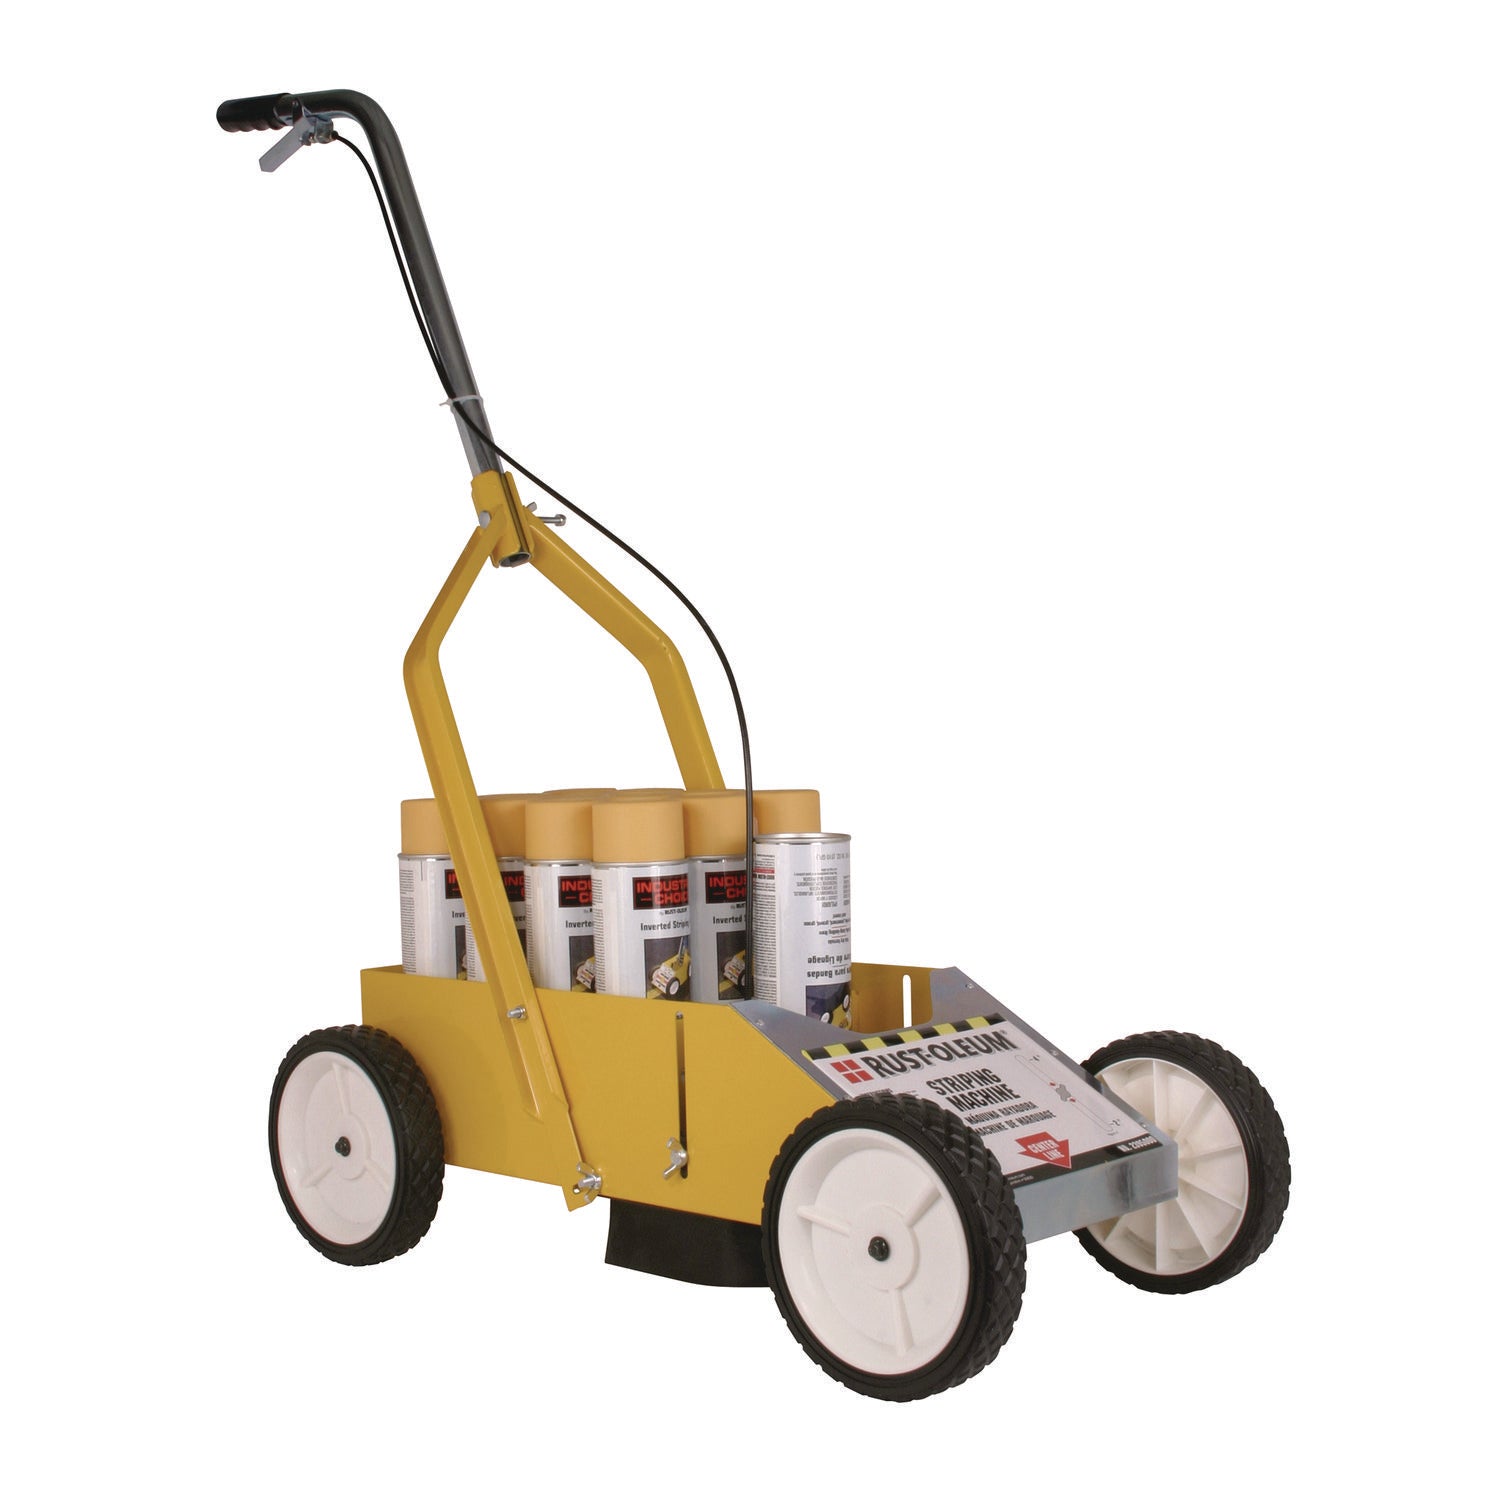 professional-striping-machine-accommodates-up-to-13-standard-inverted-striping-paint-spray-cans-yellow_rst2395000ct - 1